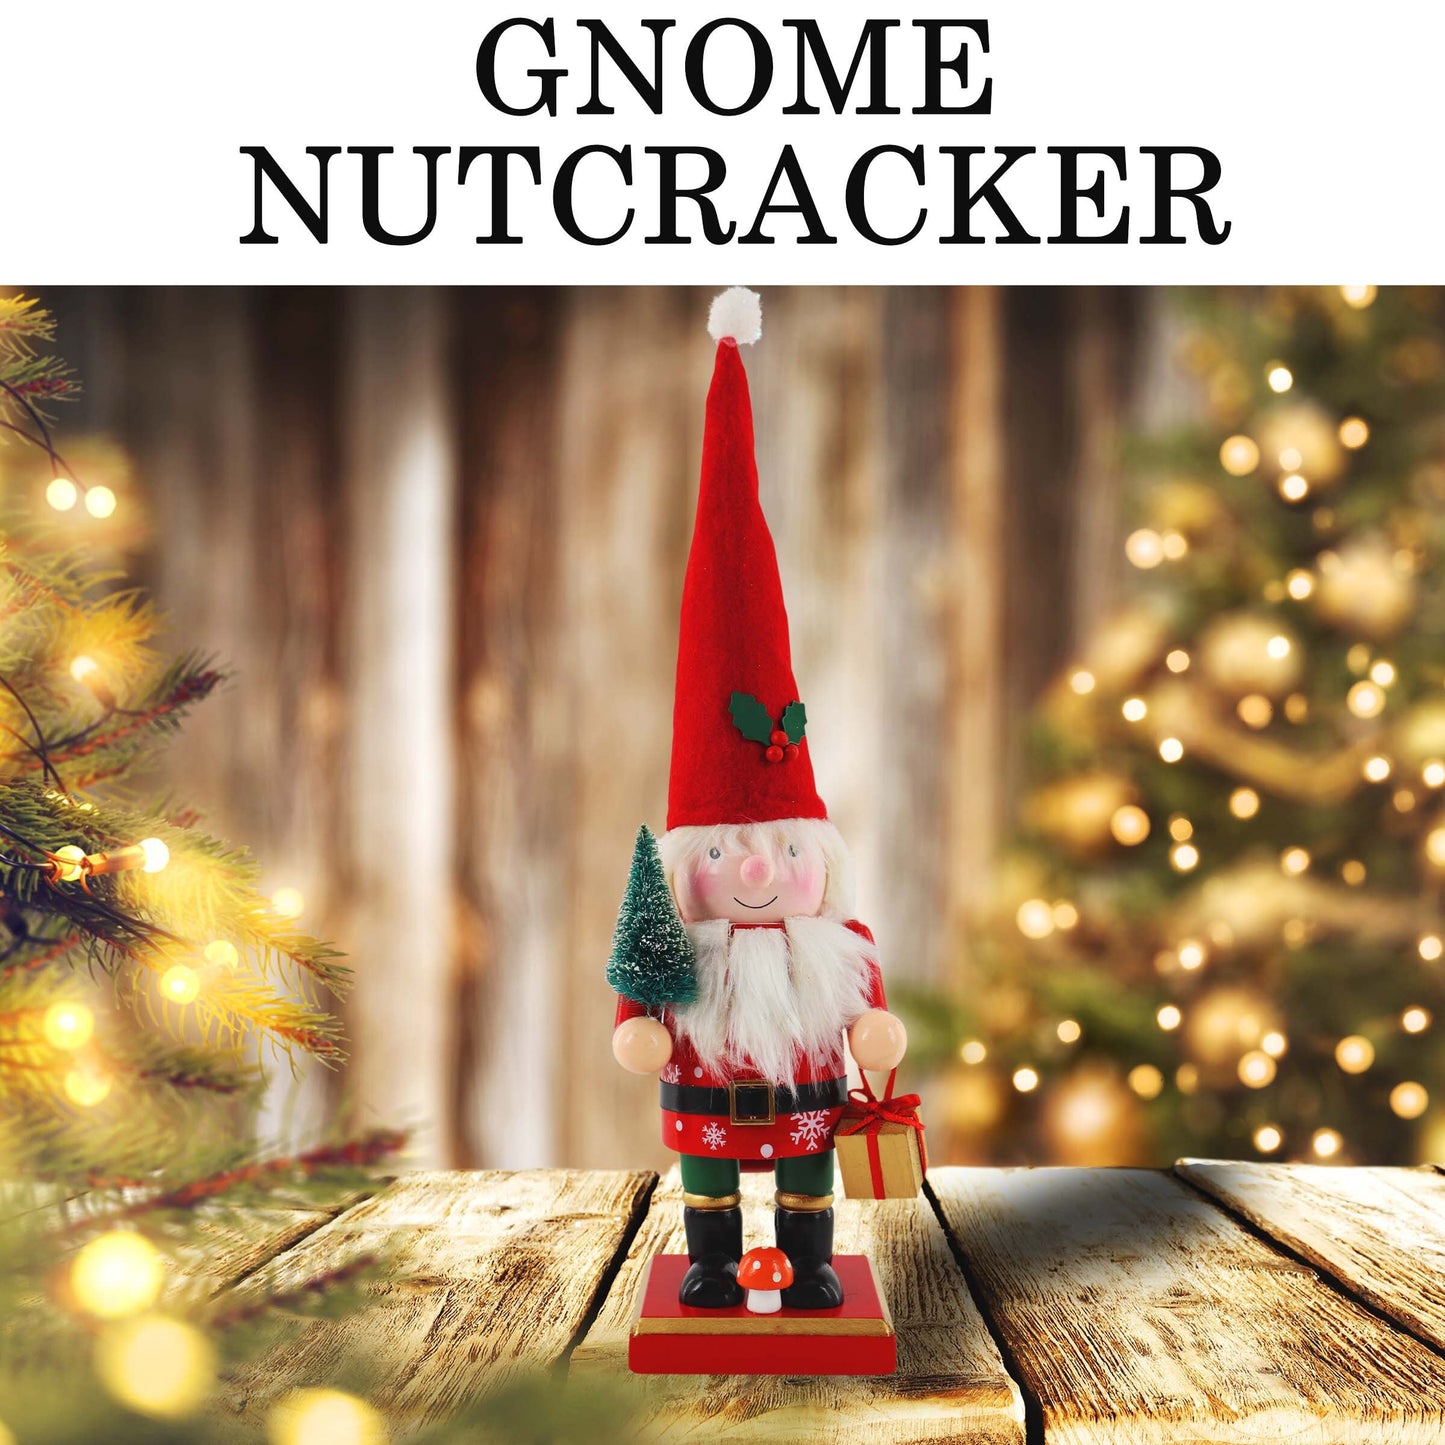 14-inch Wooden Nutcrackers Christmas Decoration Figures (Gnome)